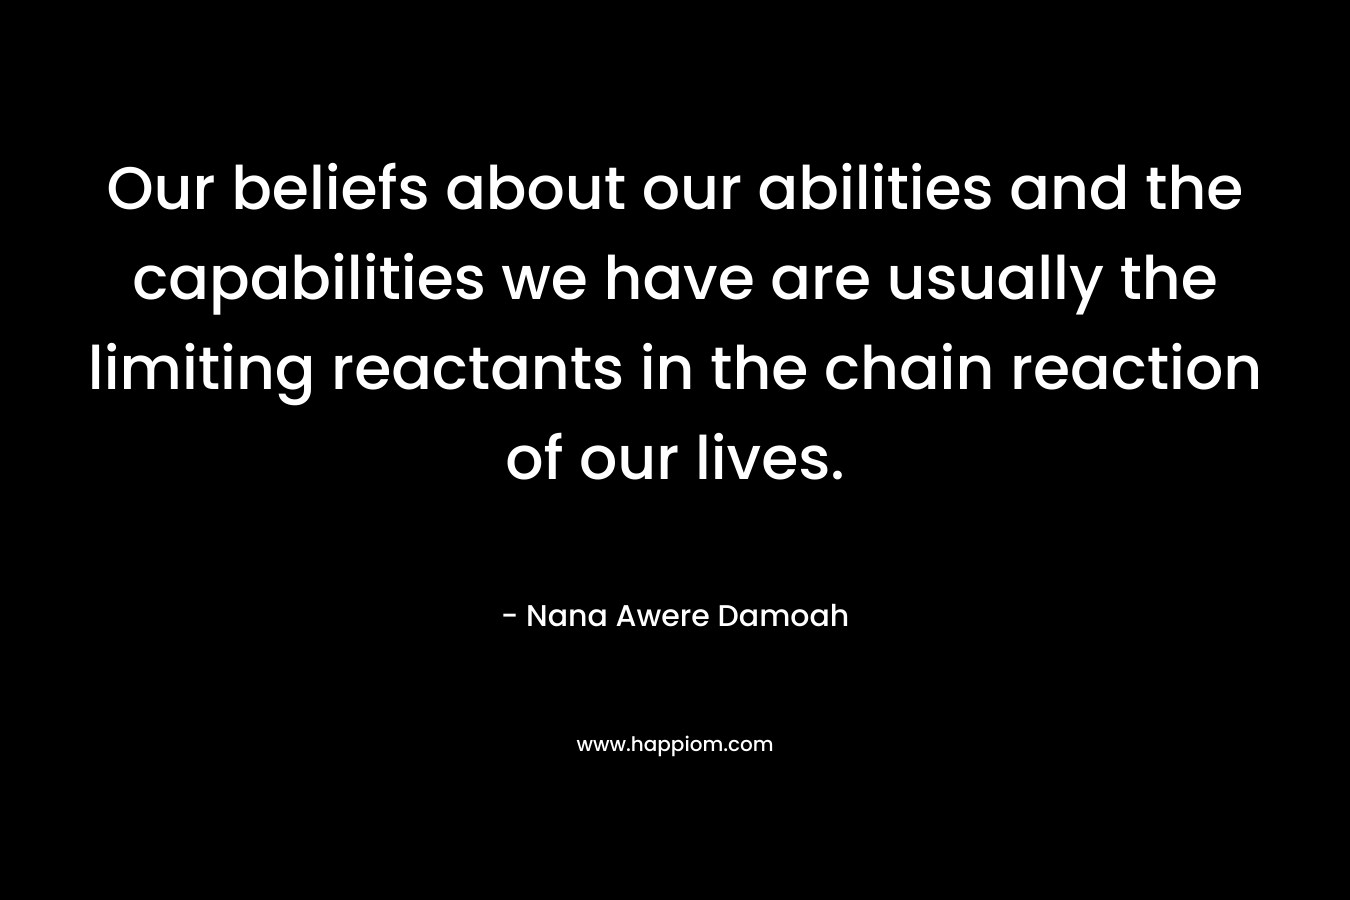 Our beliefs about our abilities and the capabilities we have are usually the limiting reactants in the chain reaction of our lives. – Nana Awere Damoah